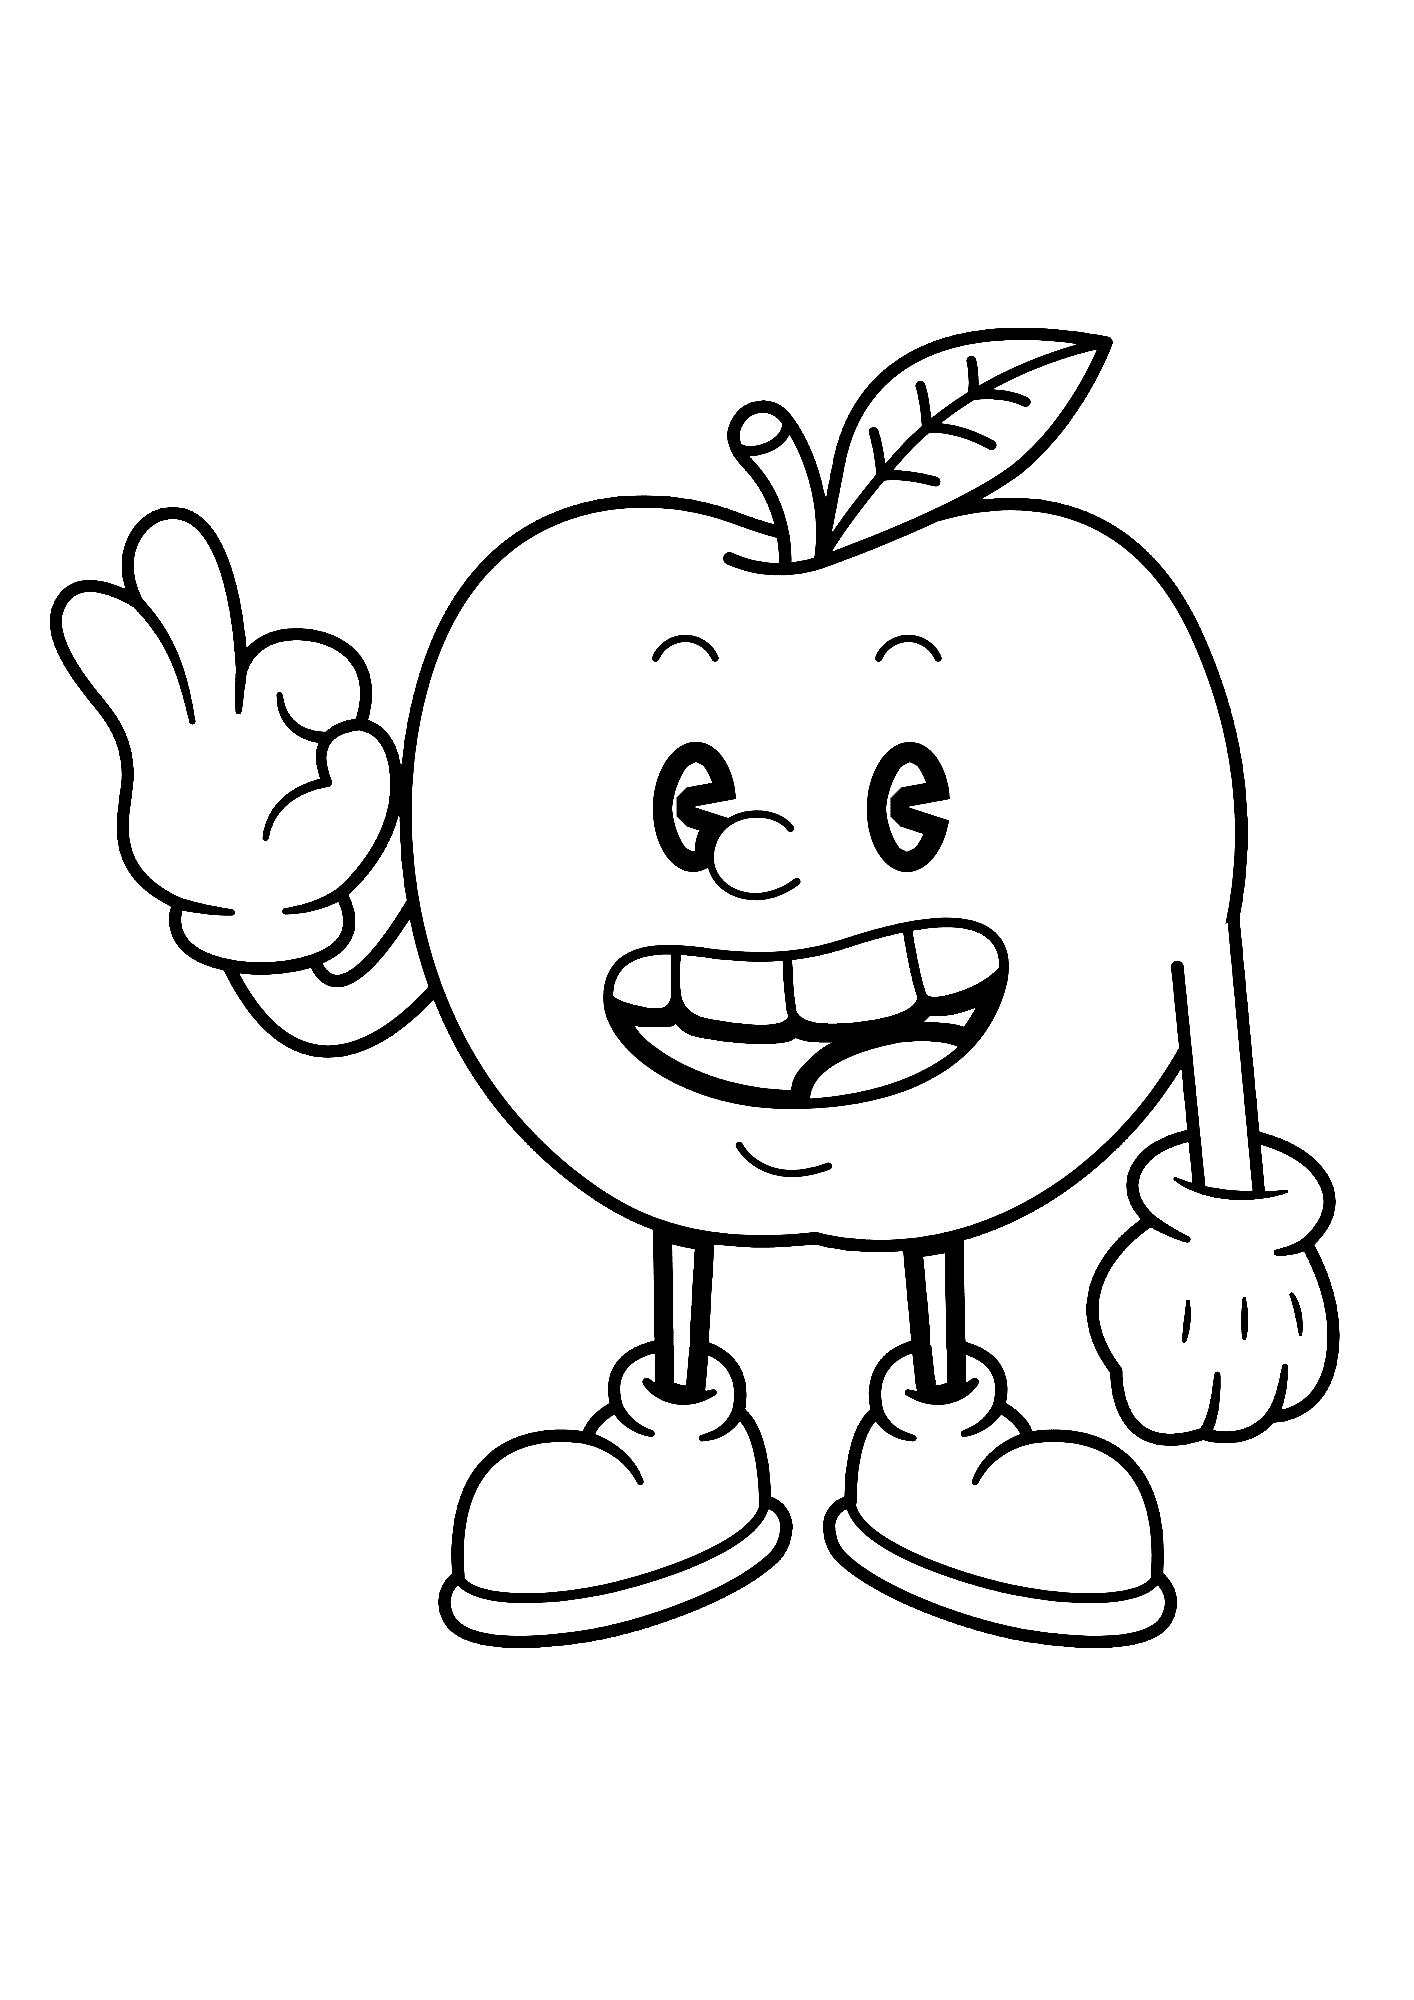 Cartoon Apple coloring pages